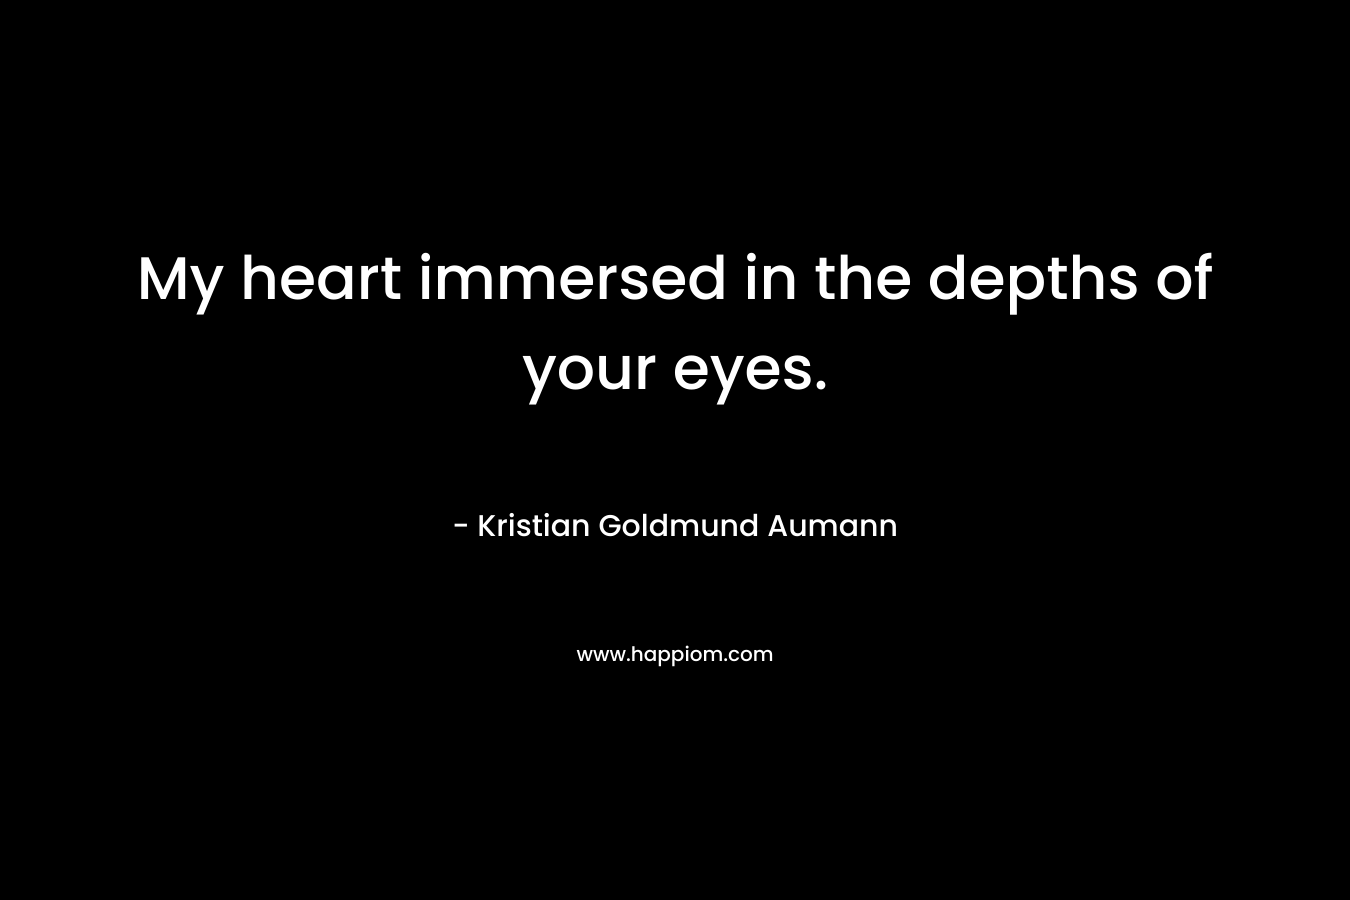 My heart immersed in the depths of your eyes.